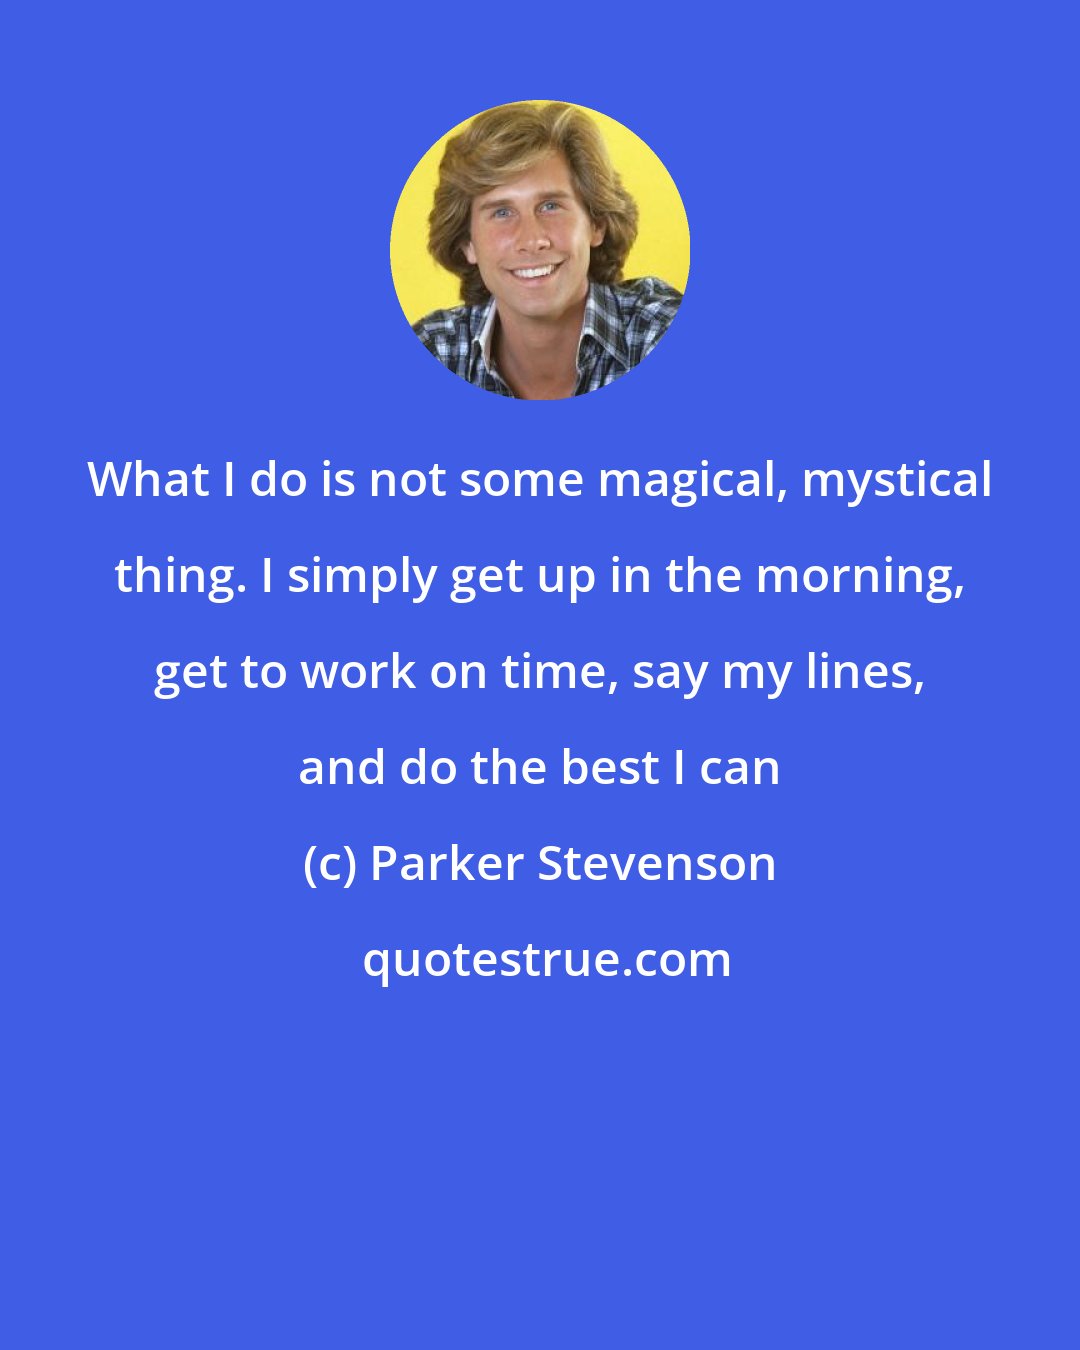 Parker Stevenson: What I do is not some magical, mystical thing. I simply get up in the morning, get to work on time, say my lines, and do the best I can